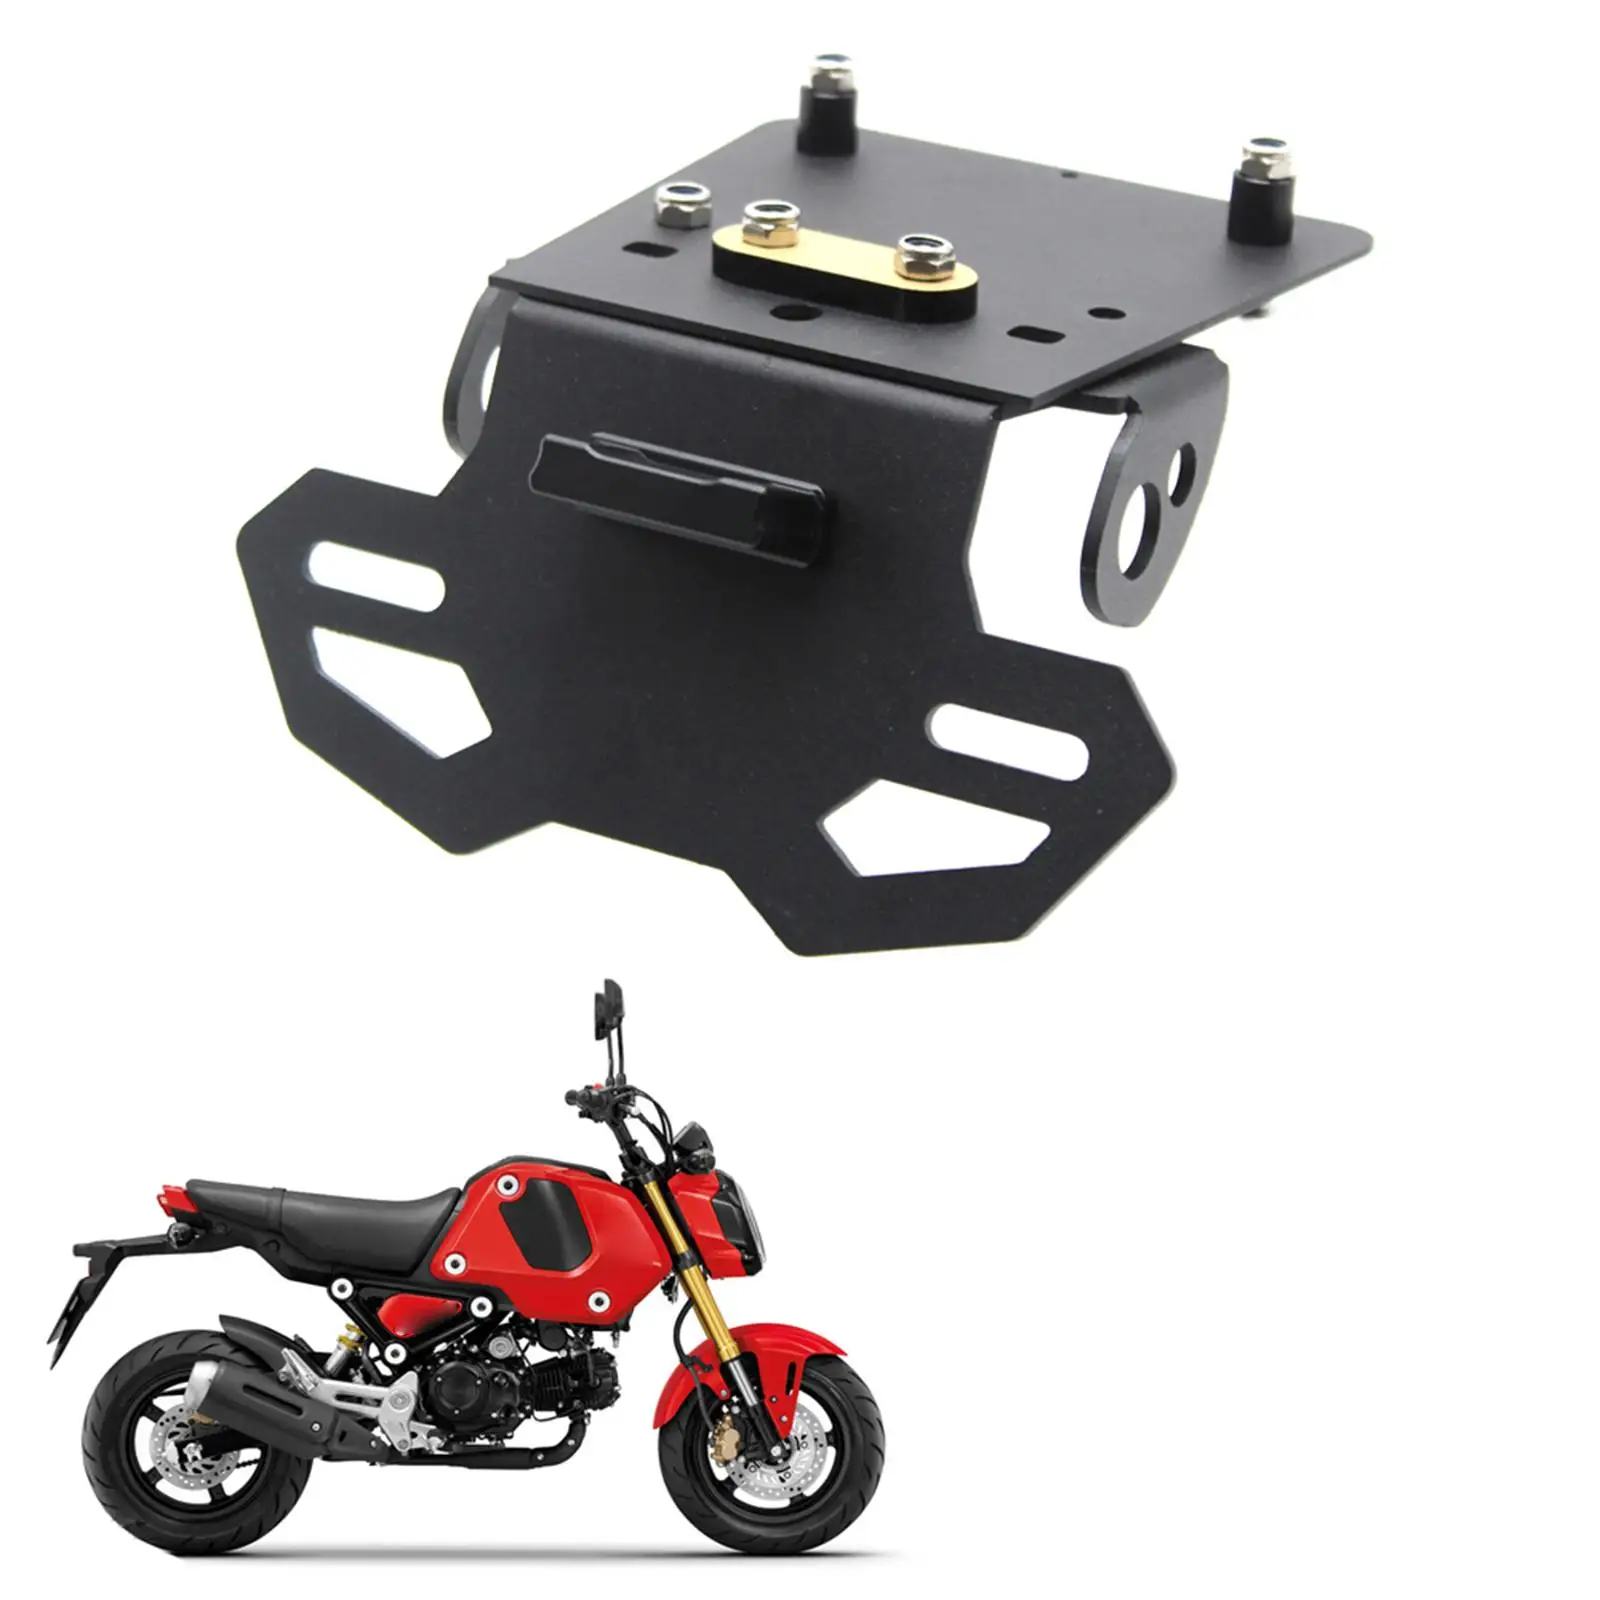   Holder  Number Lights  Bracket   Msx 125 Grom Durable Replacement 